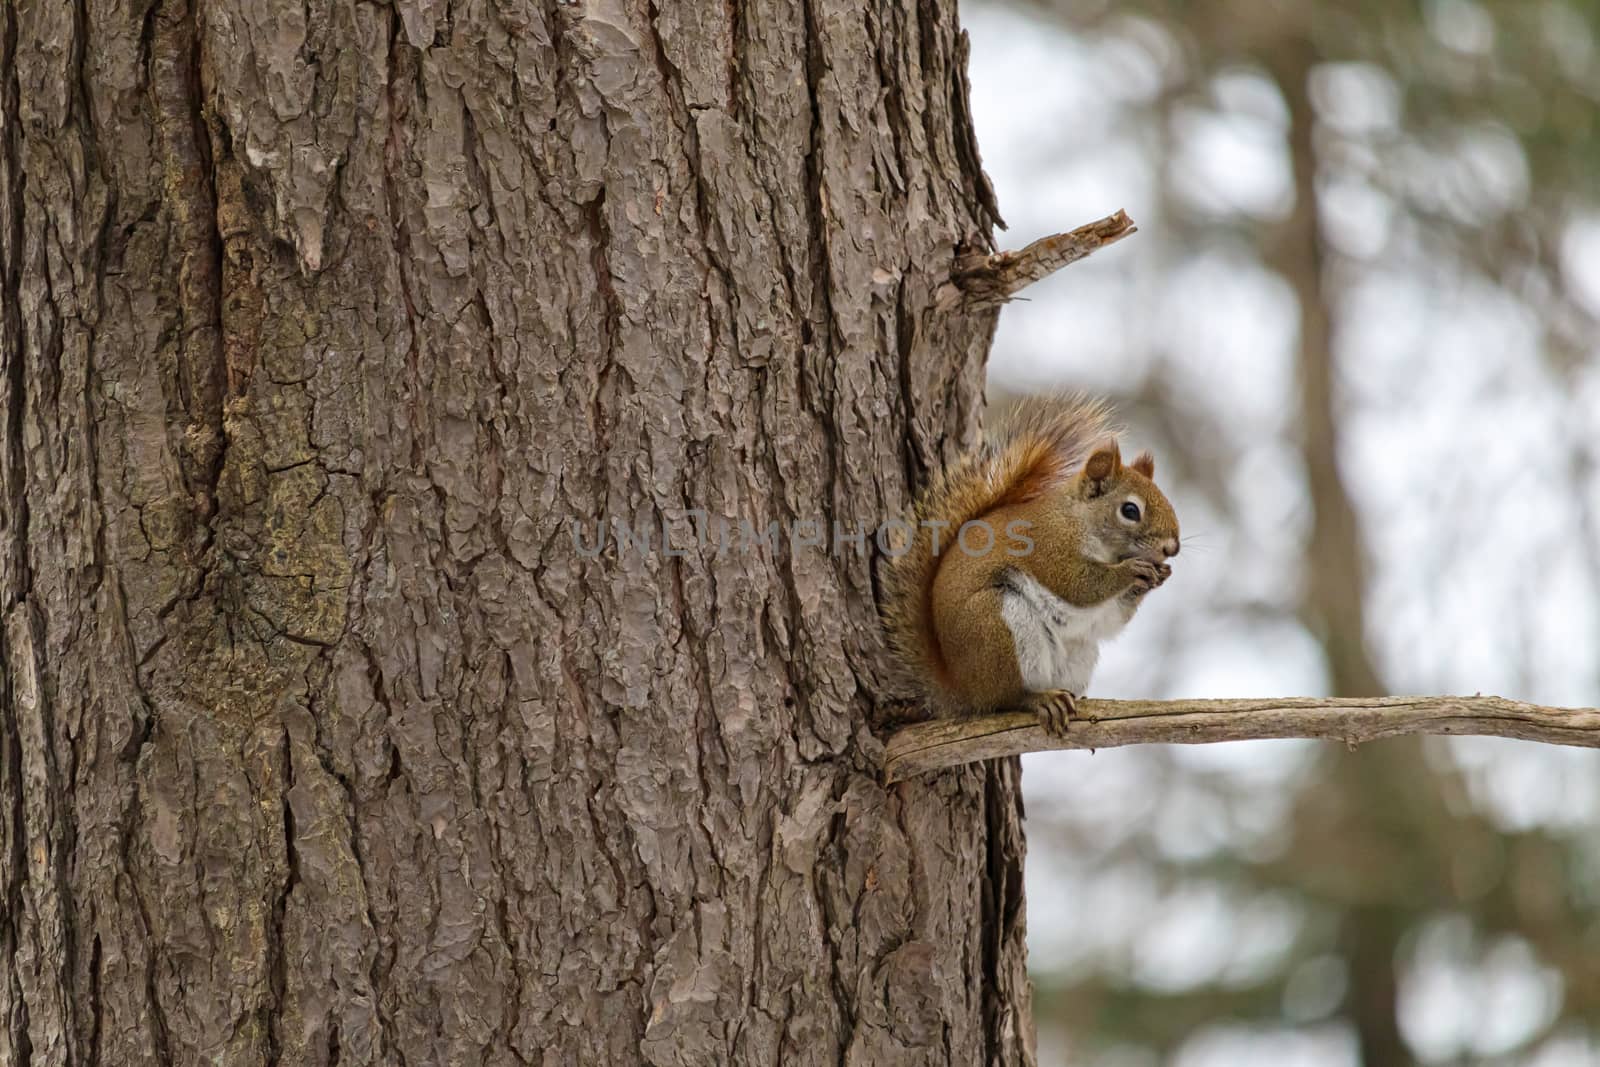 An American red squirrel is perched on a small branch by the trunk of a tree as it nibbles on seeds in its paws.